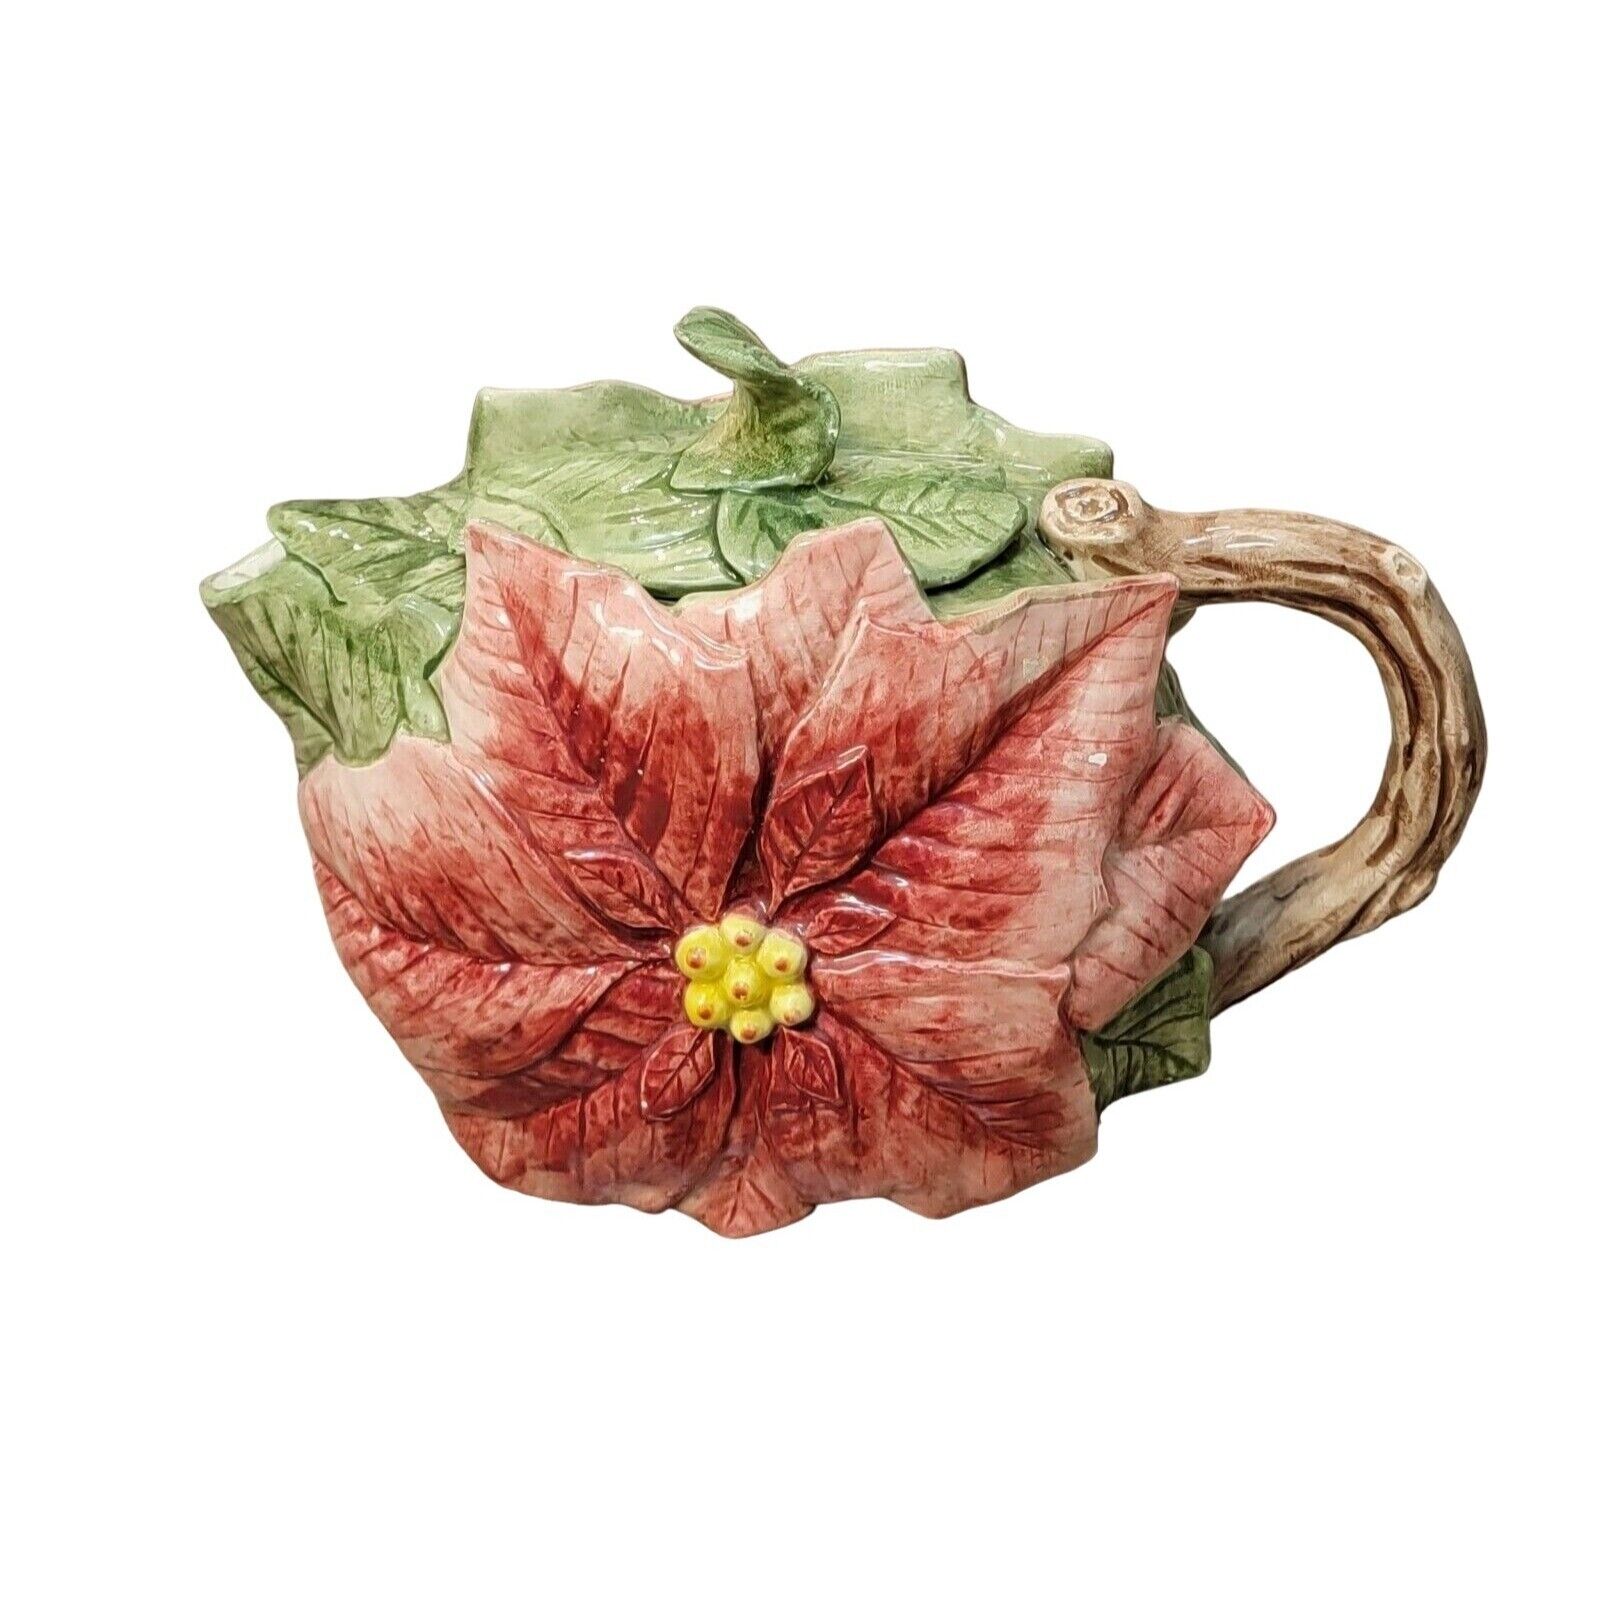 Department 56 Poinsettia Teapot Red Floral Christmas 